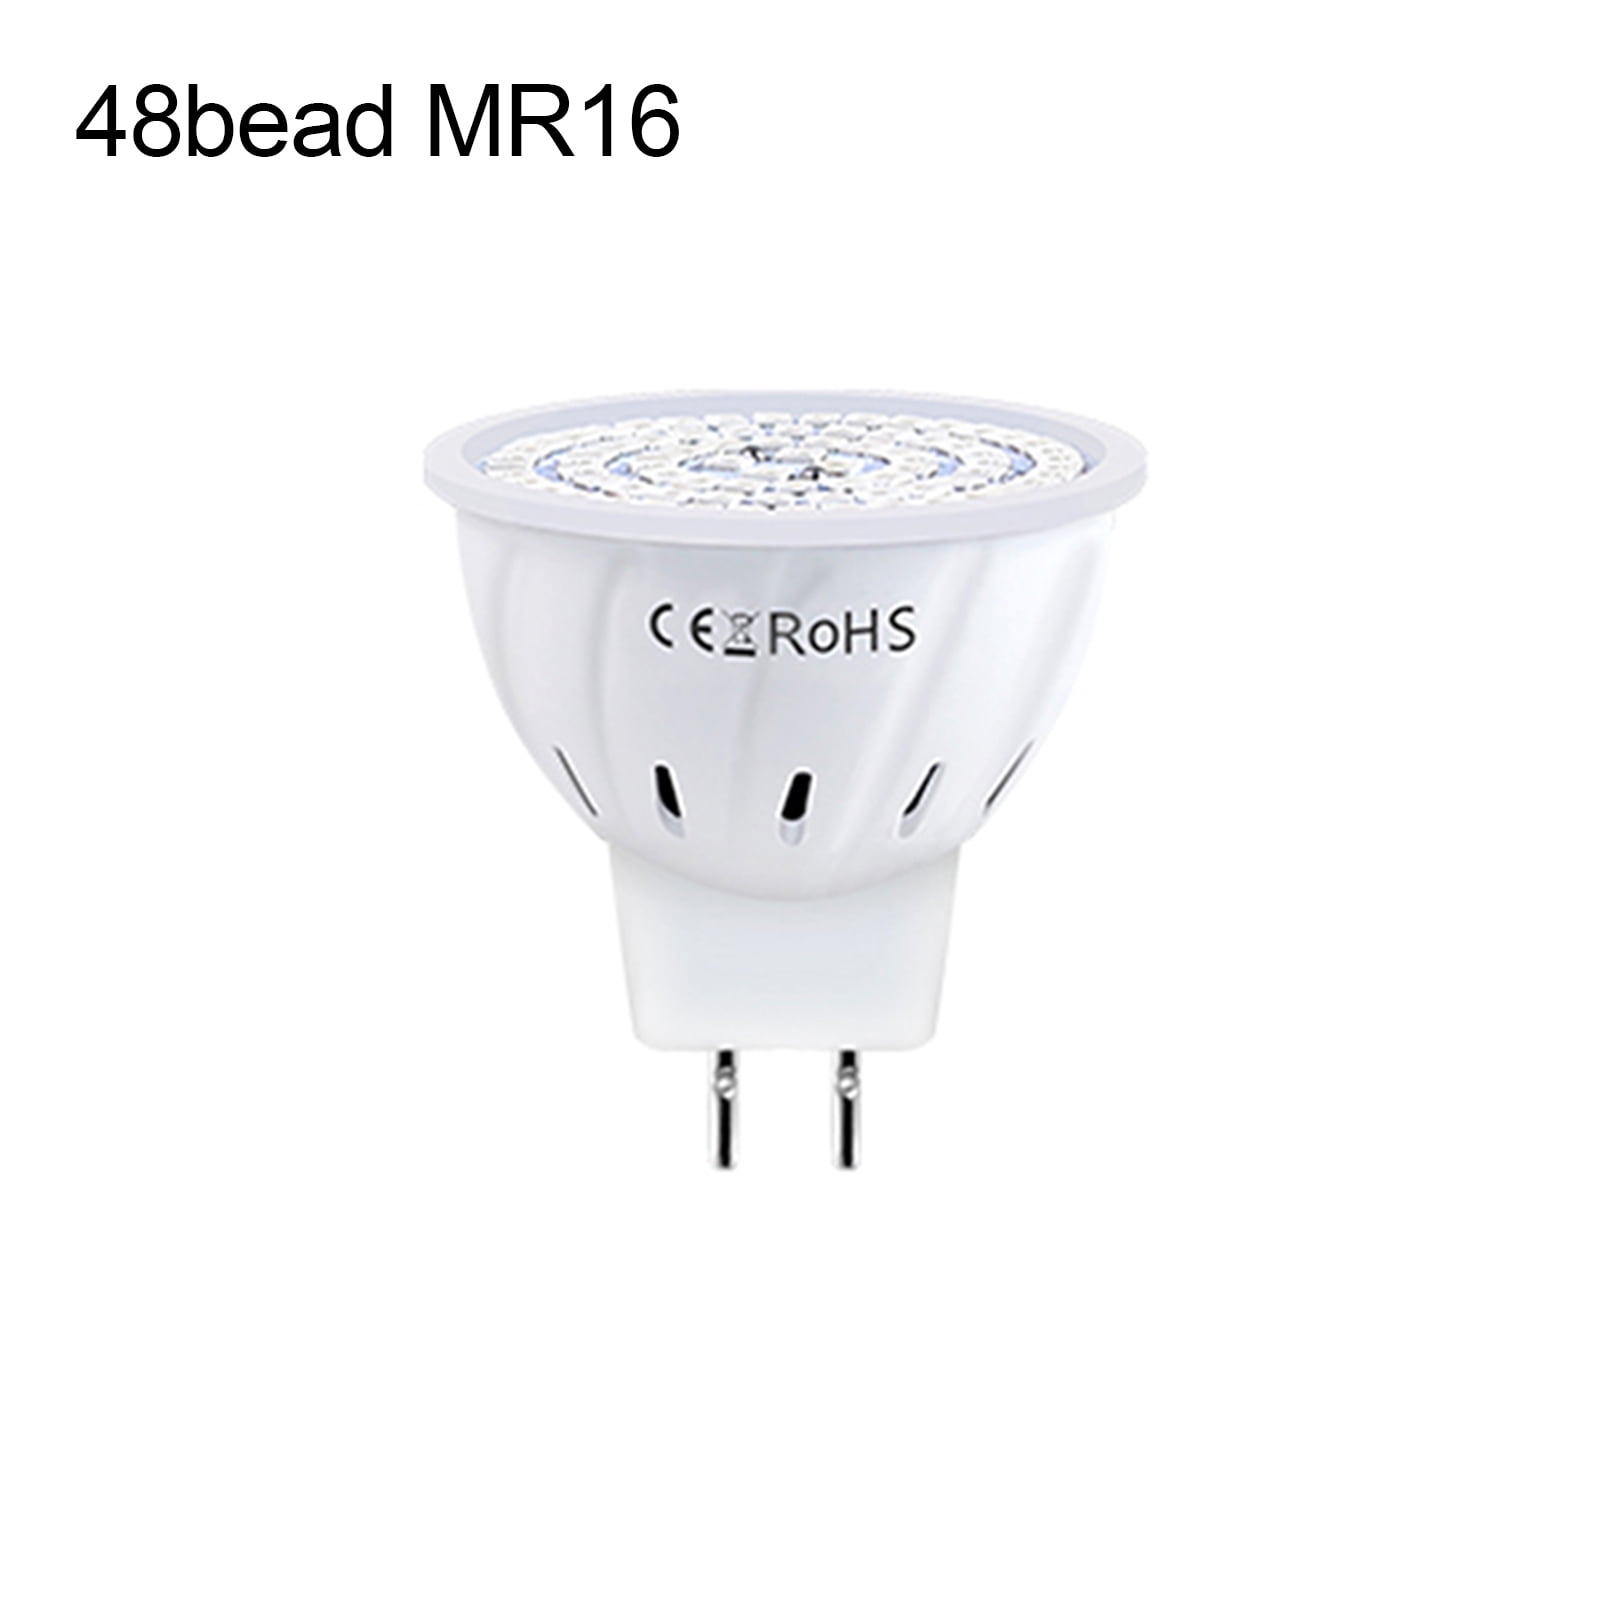 Welling E27/E14/B22/GU10/MR16 Light Bulb High Temperature Resistance Easy to Super Bright Professional LED Plant Grow Lamp for Indoor - Walmart.com